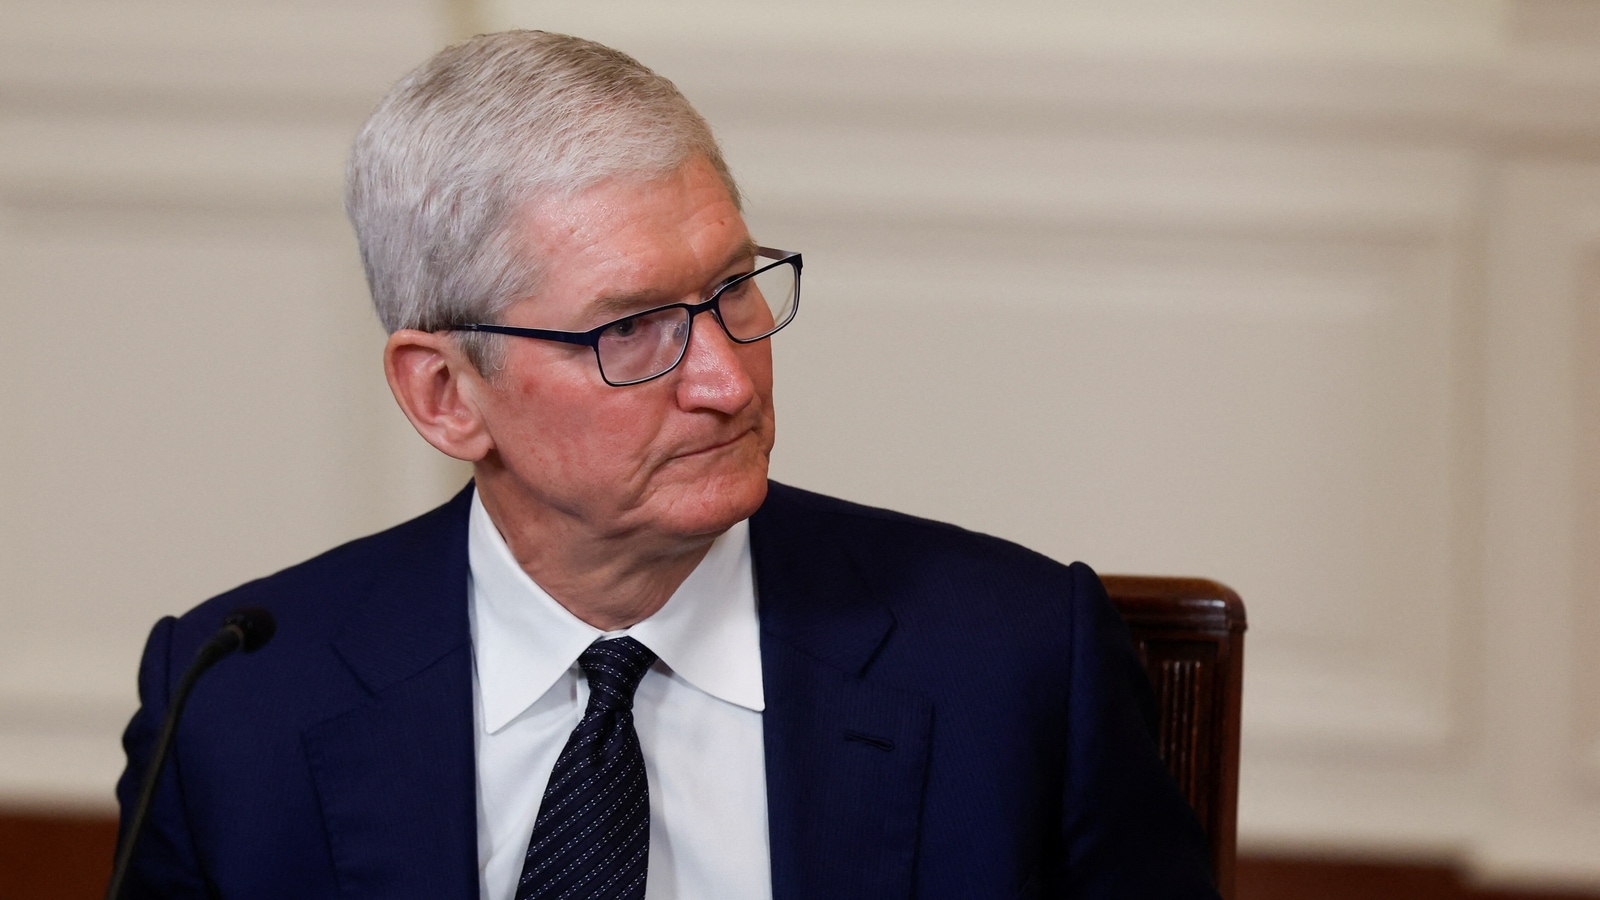 Tim Cook hints Apple could be a part of 'major changes in media